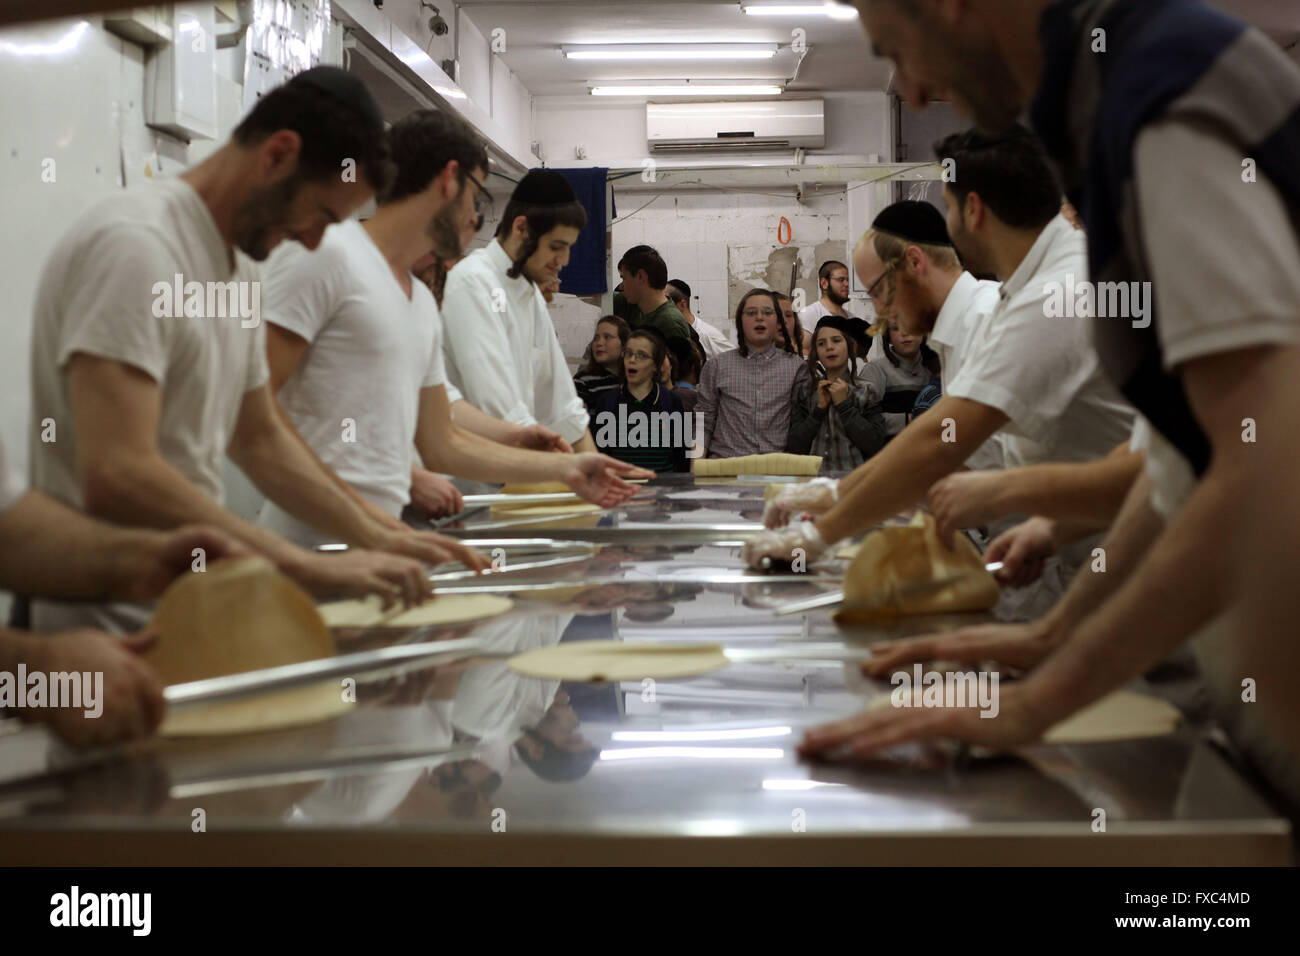 Jerusalem. 22nd Apr, 2016. Jewish boys watch the baking of the Matzoth (unleavened bread) during the preparations for the upcoming Jewish Pesach (Passover) holiday on April 13, 2016 in Bnei Brak, near the city of Tel Aviv. Pesach, which will be marked on April 22, 2016, commemorates the Israelites' exodus from slavery in Egypt some 3,500 years ago and their plight by refraining from eating leavened food products. © Gil Cohen Magen/Xinhua/Alamy Live News Stock Photo